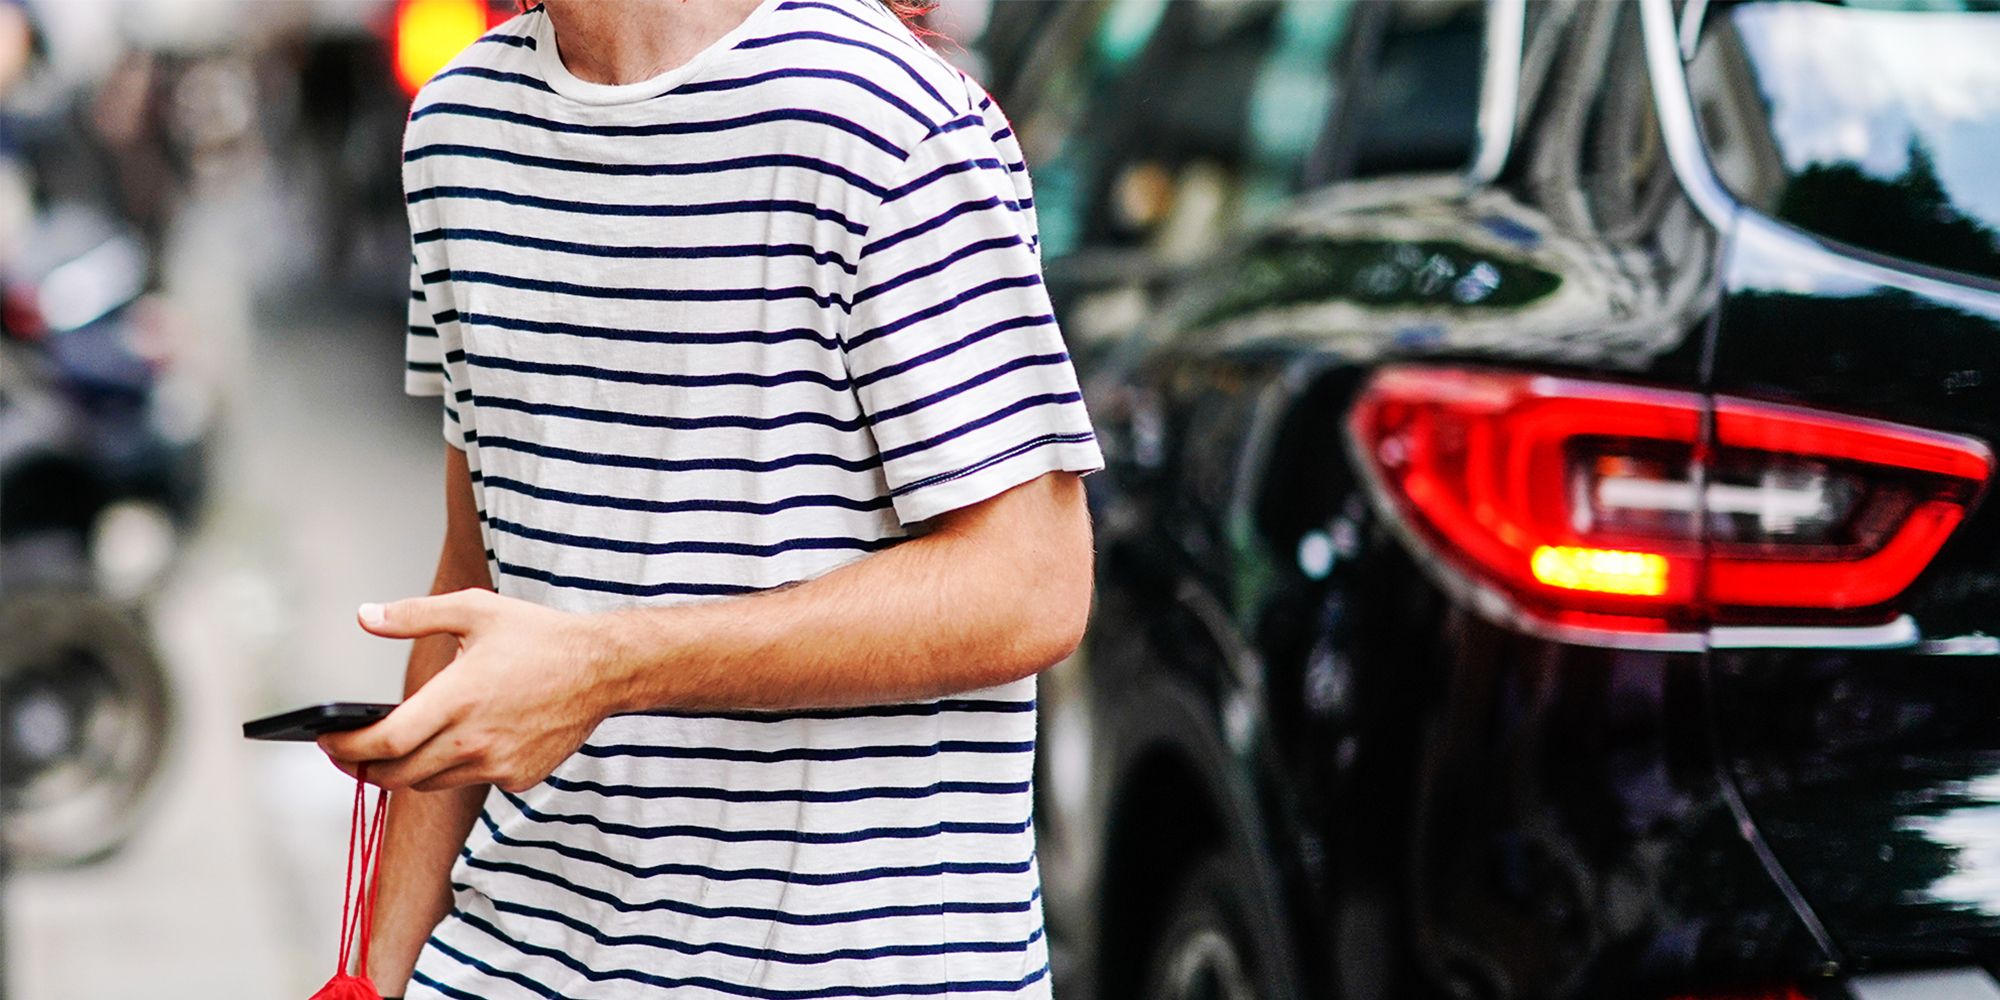 The Best Striped T-Shirts for Men in 2020